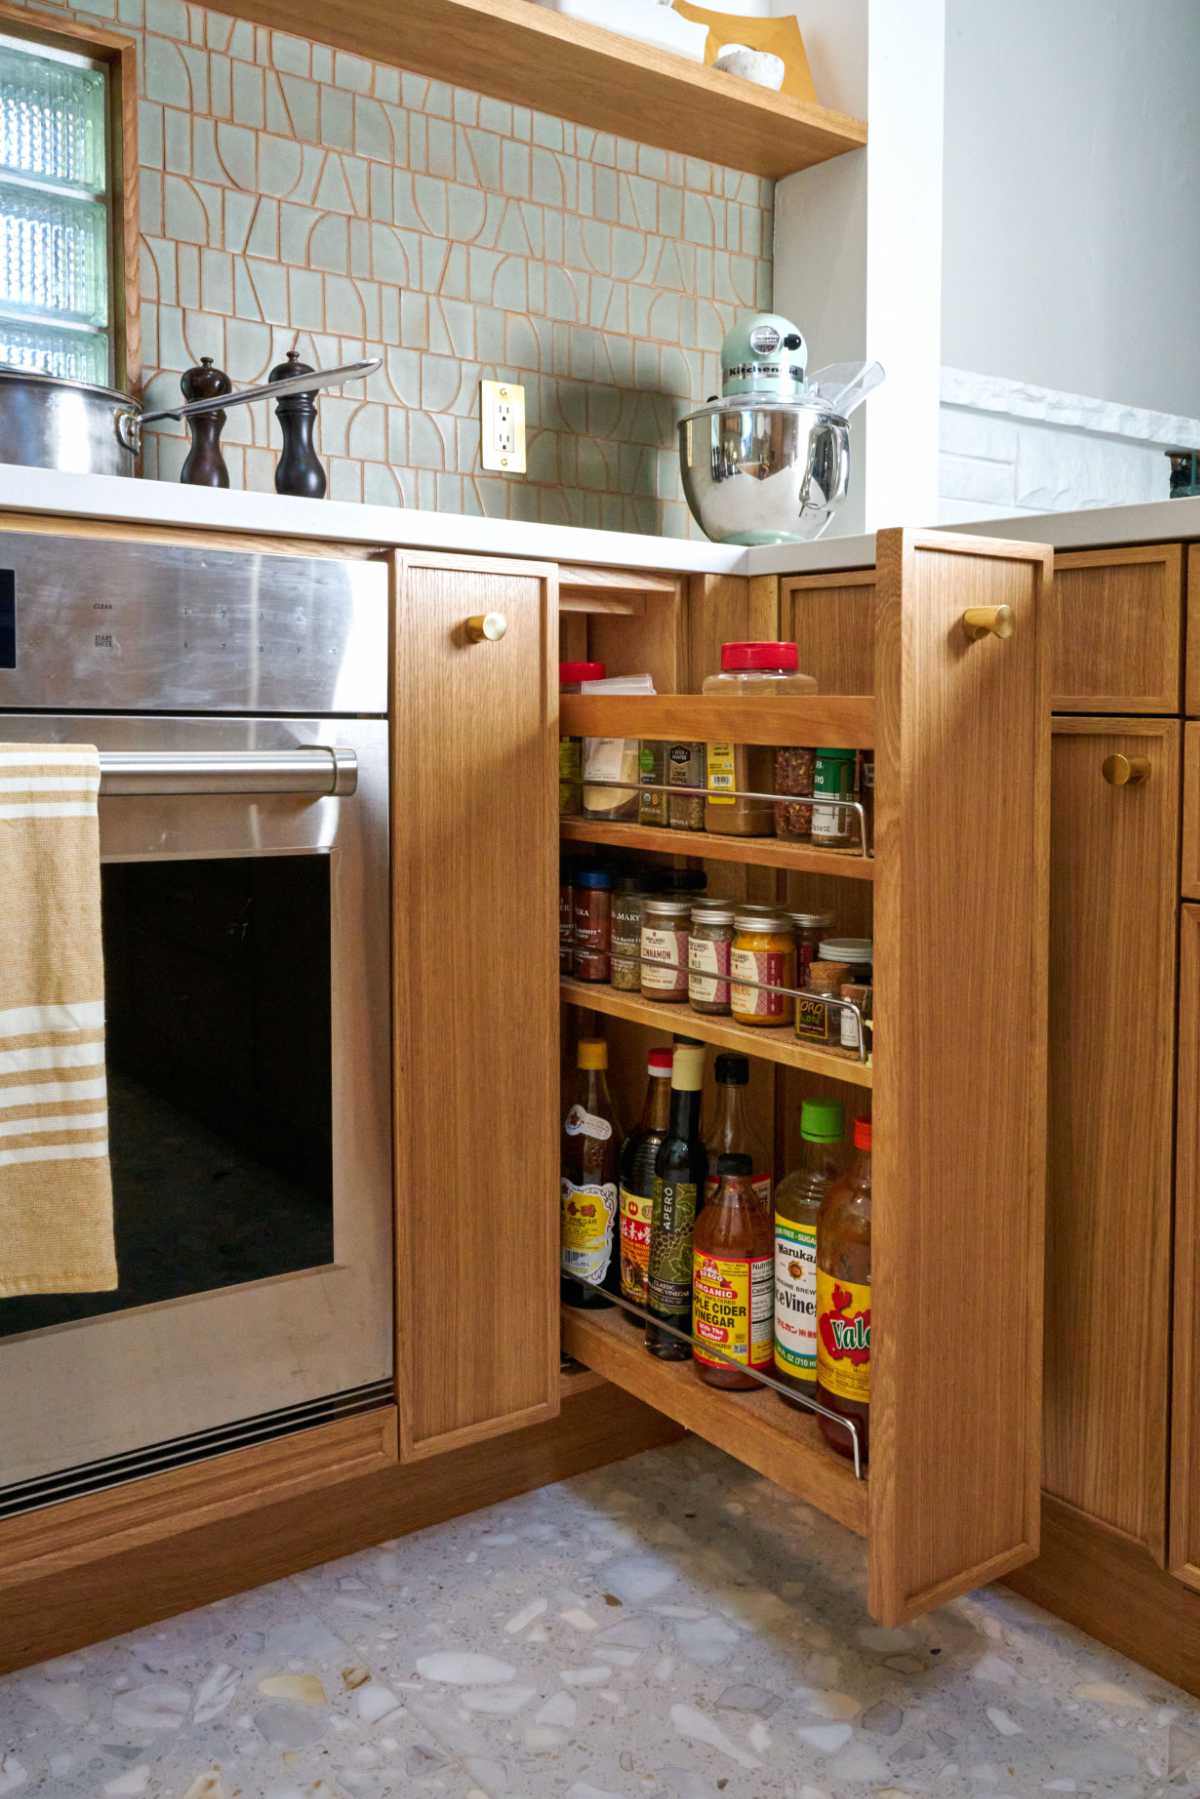 Kitchen spice rack pull out next to oven.